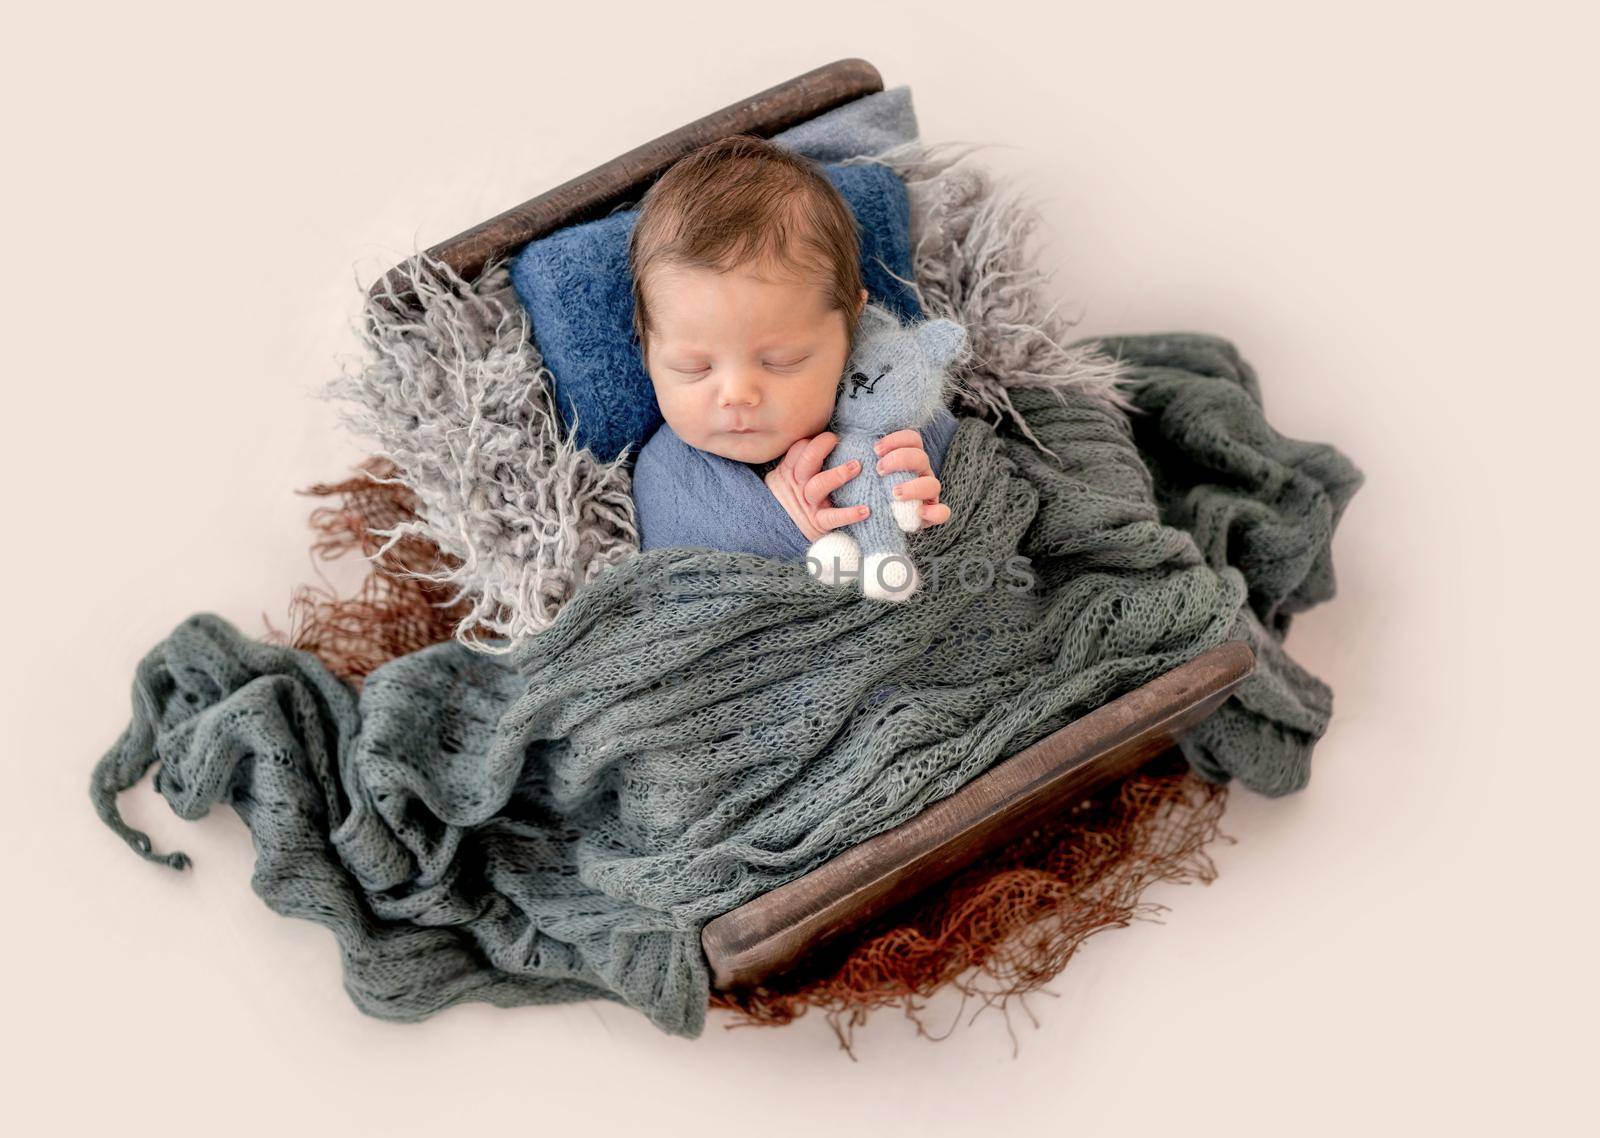 Newborn baby boy sleeping in tiny bed in knitted blanket and hugging toy. Infant kid studio portrait with decoration